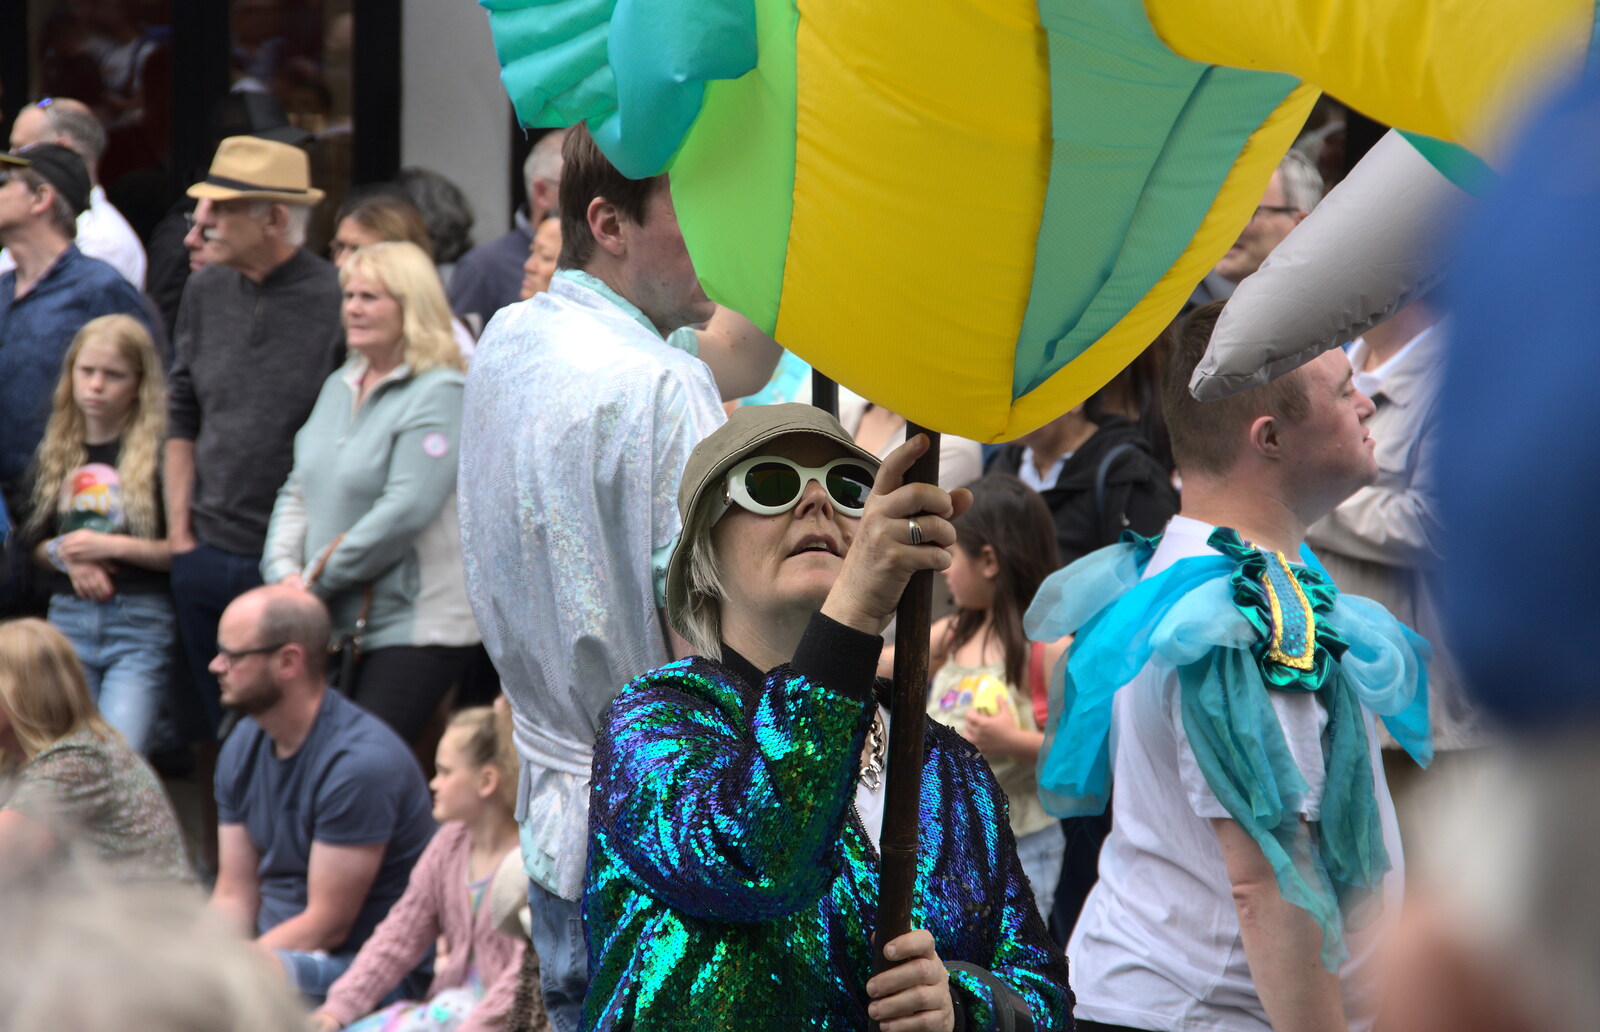 A woman struggles with an inflatable from The Lord Mayor's Procession, Norwich, Norfolk - 2nd July 2022